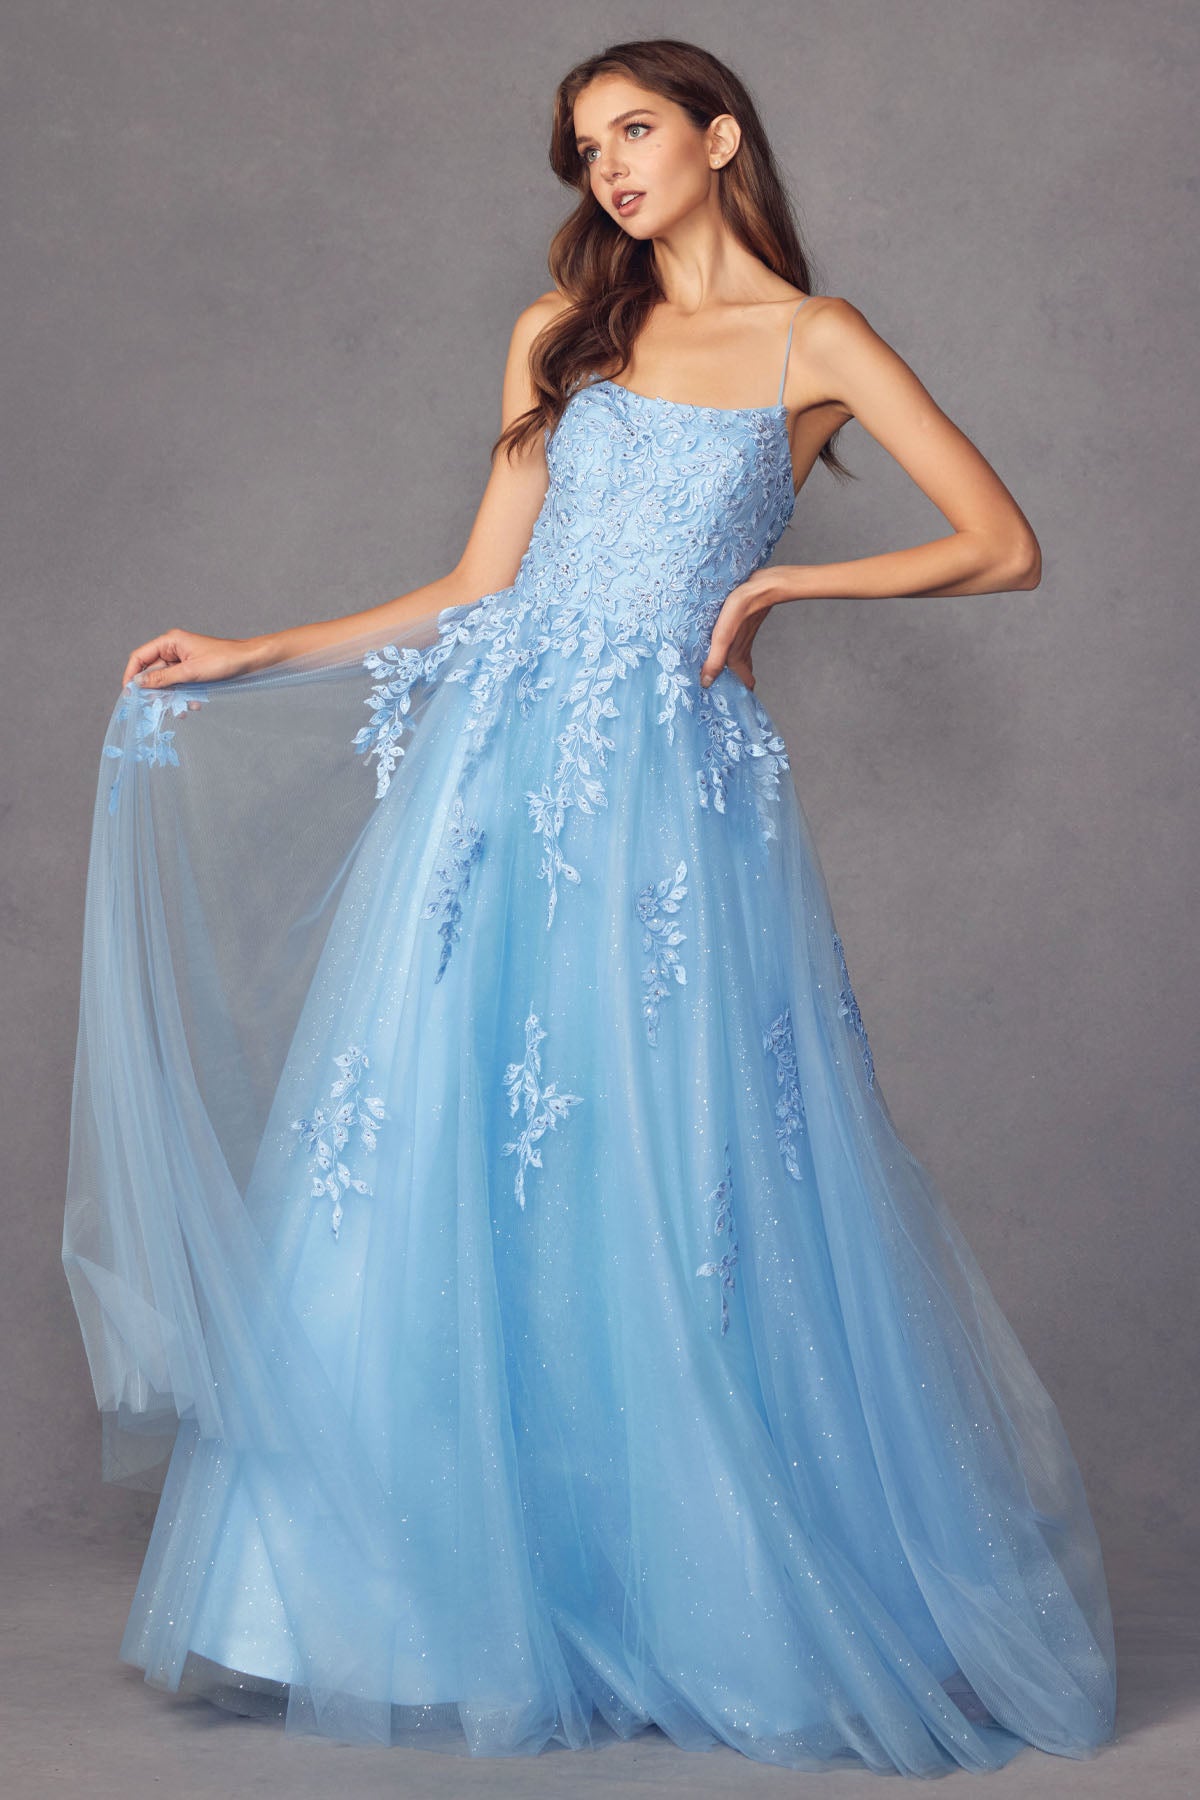 Floral applique tulle prom ball gown-smcdress